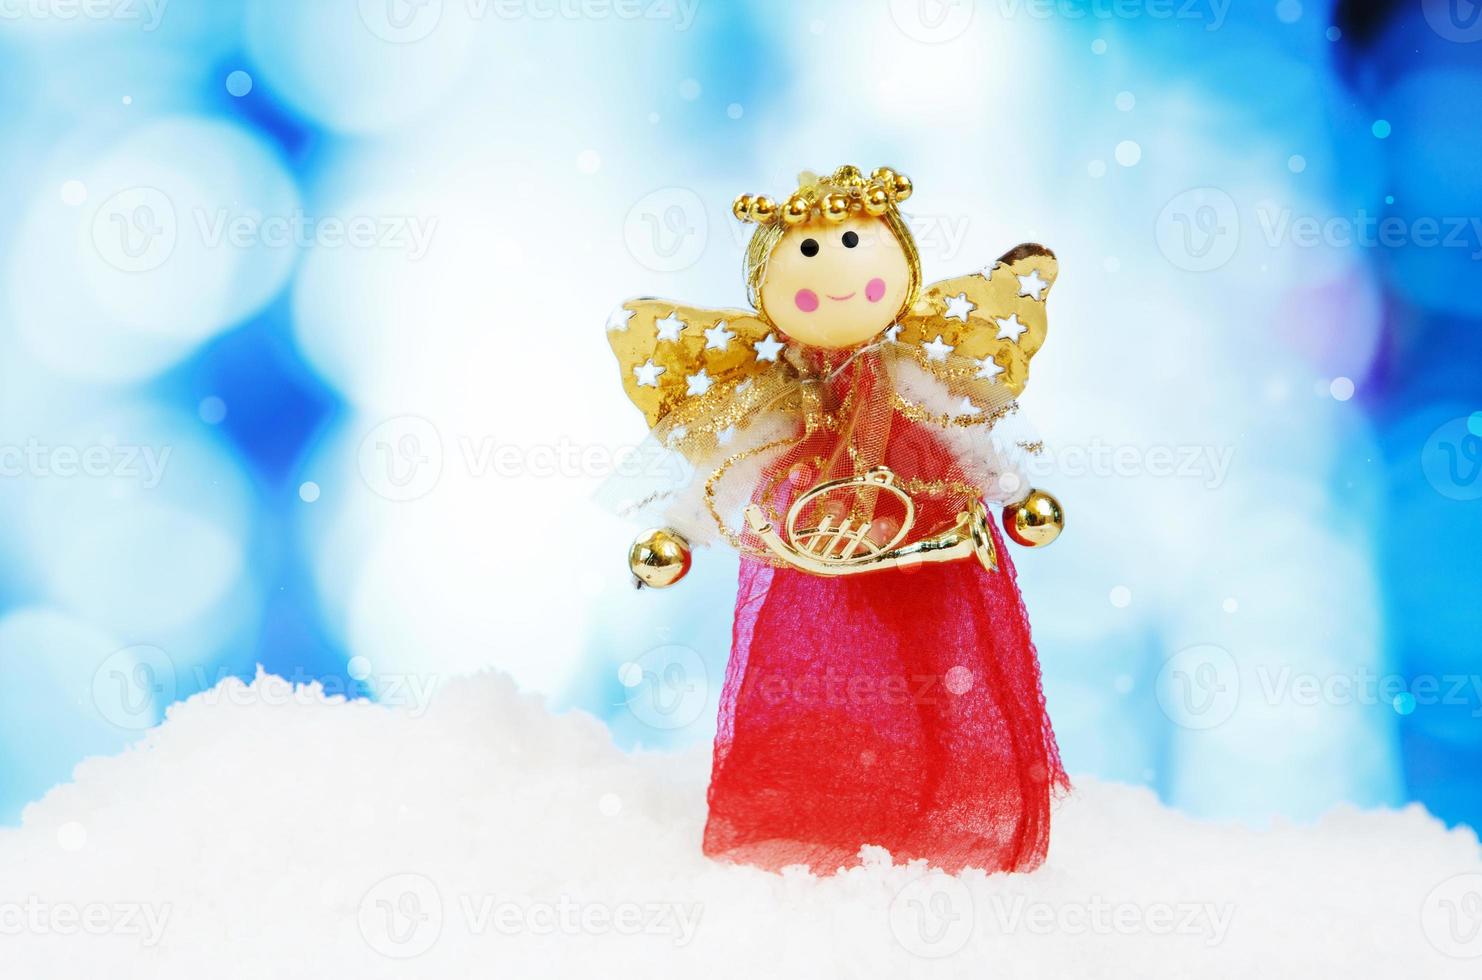 Angel and christmas decoration on abstract background and snowflakes photo